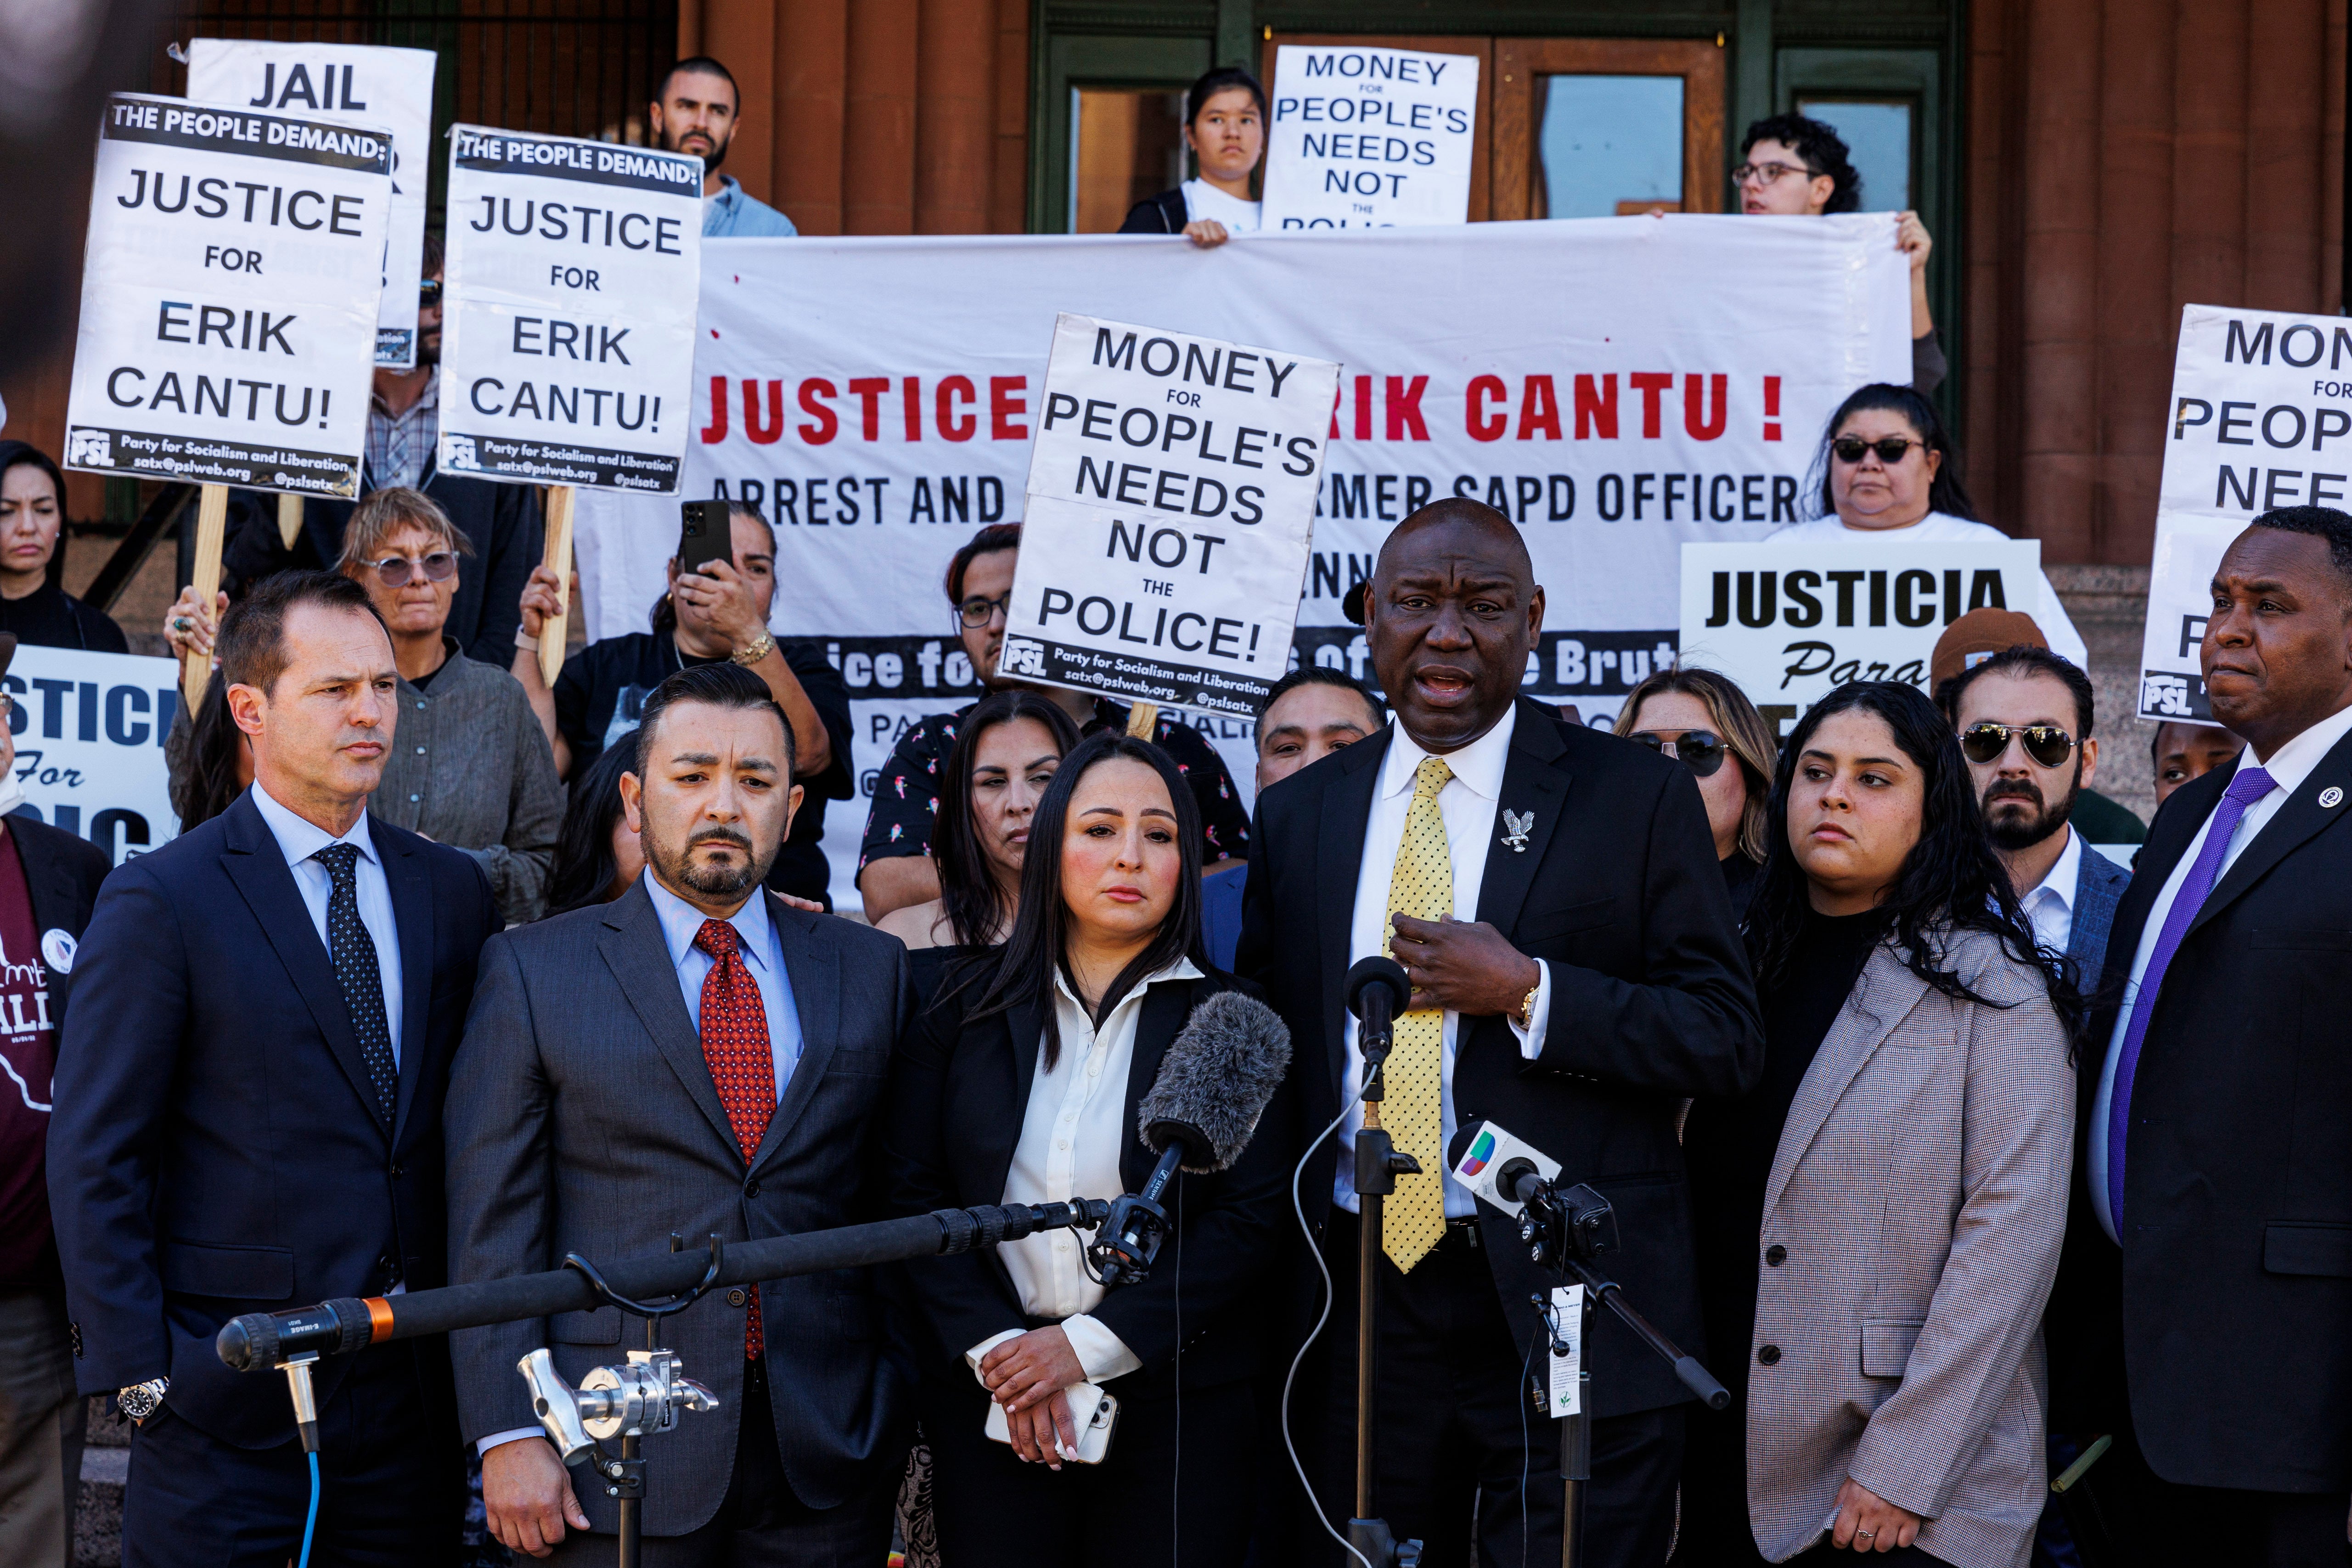 Attorney Benjamin Crump, third from right, addresses the media alongside 17-year-old Erik Cantu's family during a press conference held to update the public about his current medical condition in front of the Bexar County Courthouse in San Antonio, Tuesday, Oct. 25, 2022